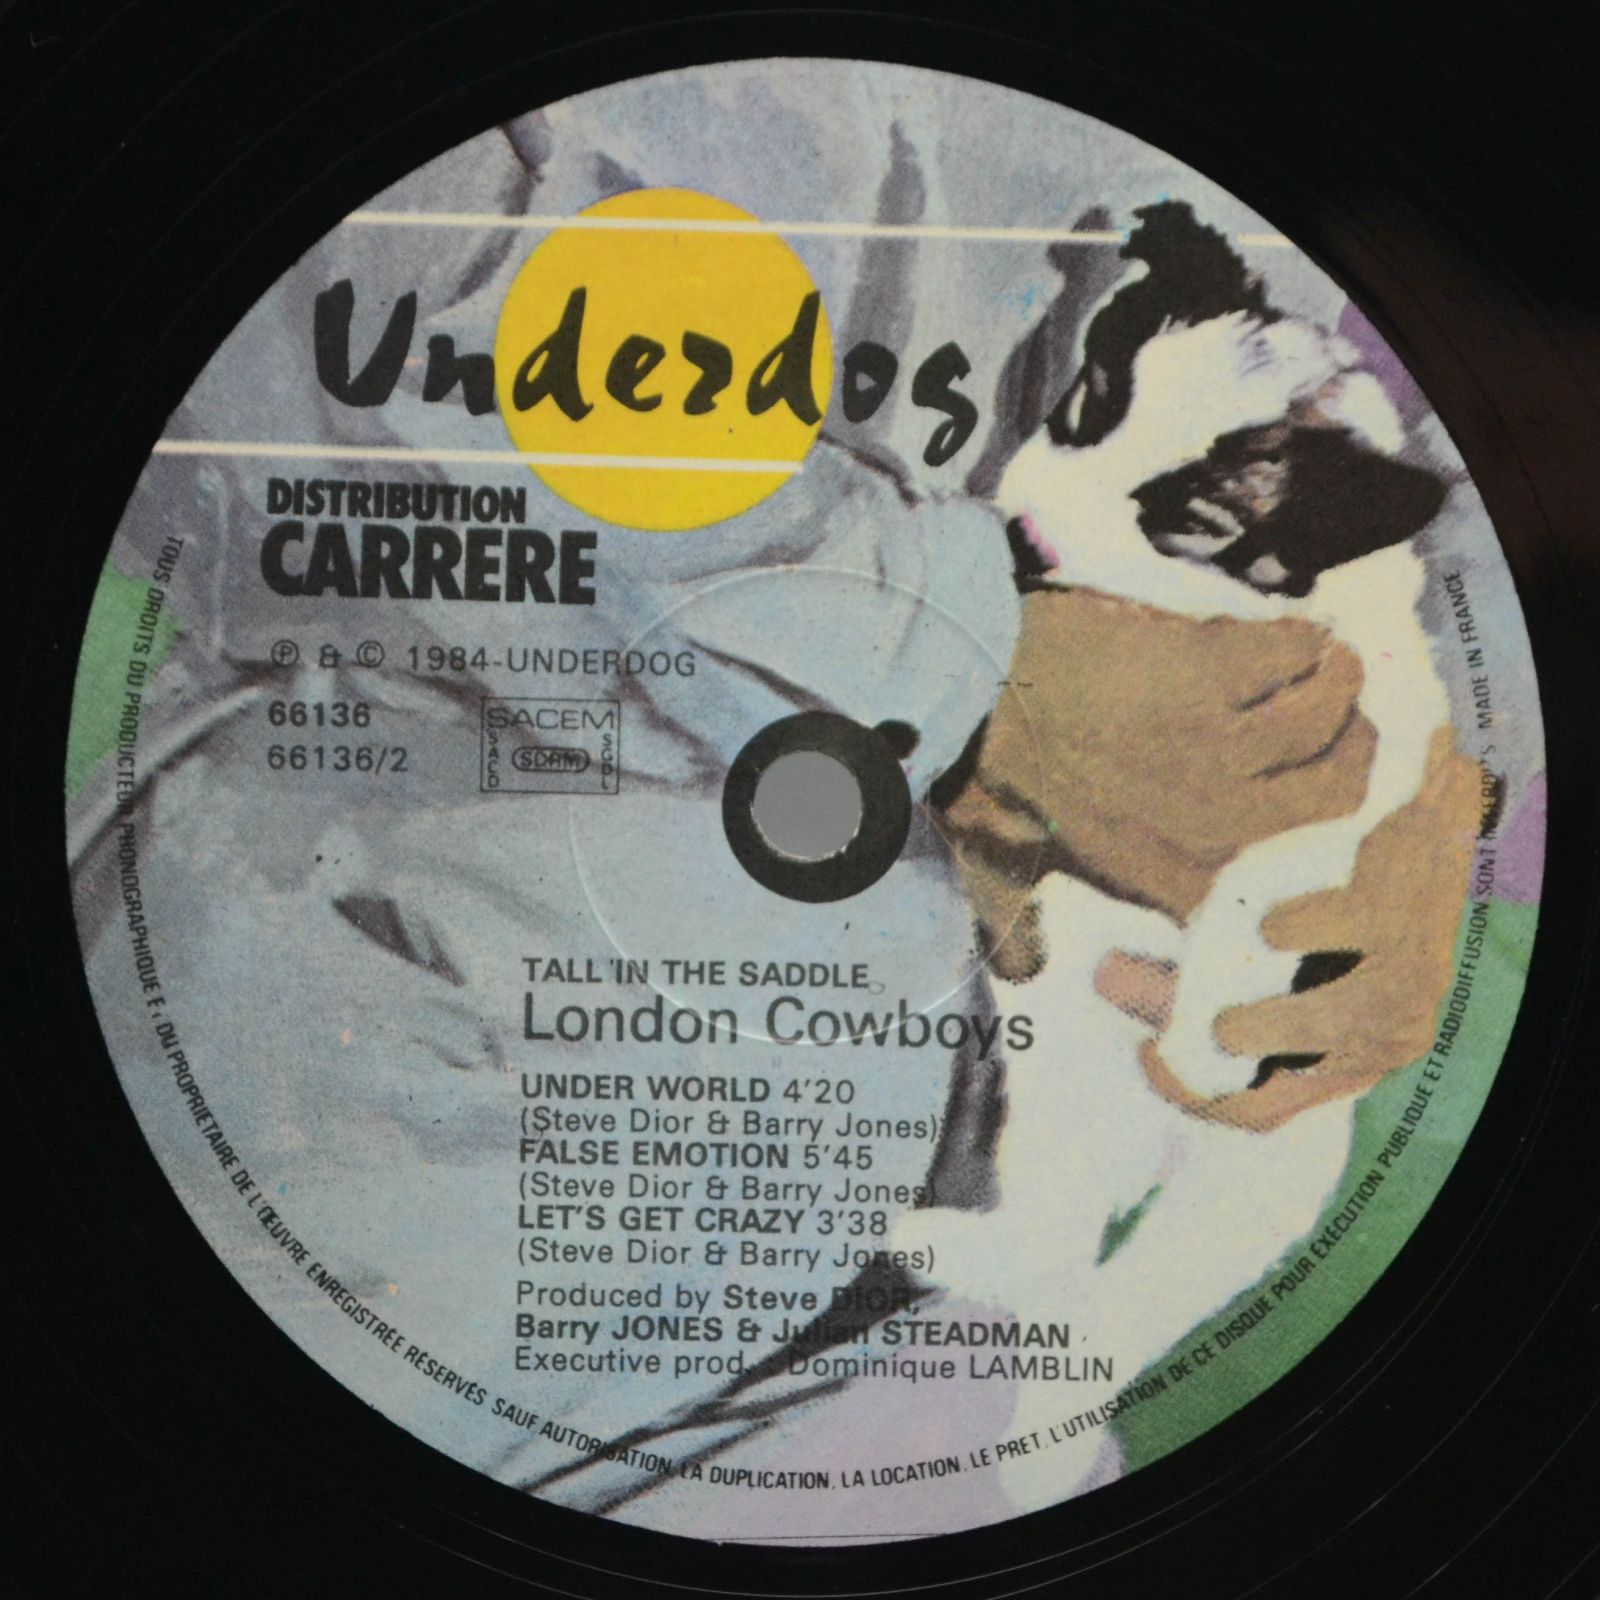 London Cowboys — Tall In The Saddle, 1984